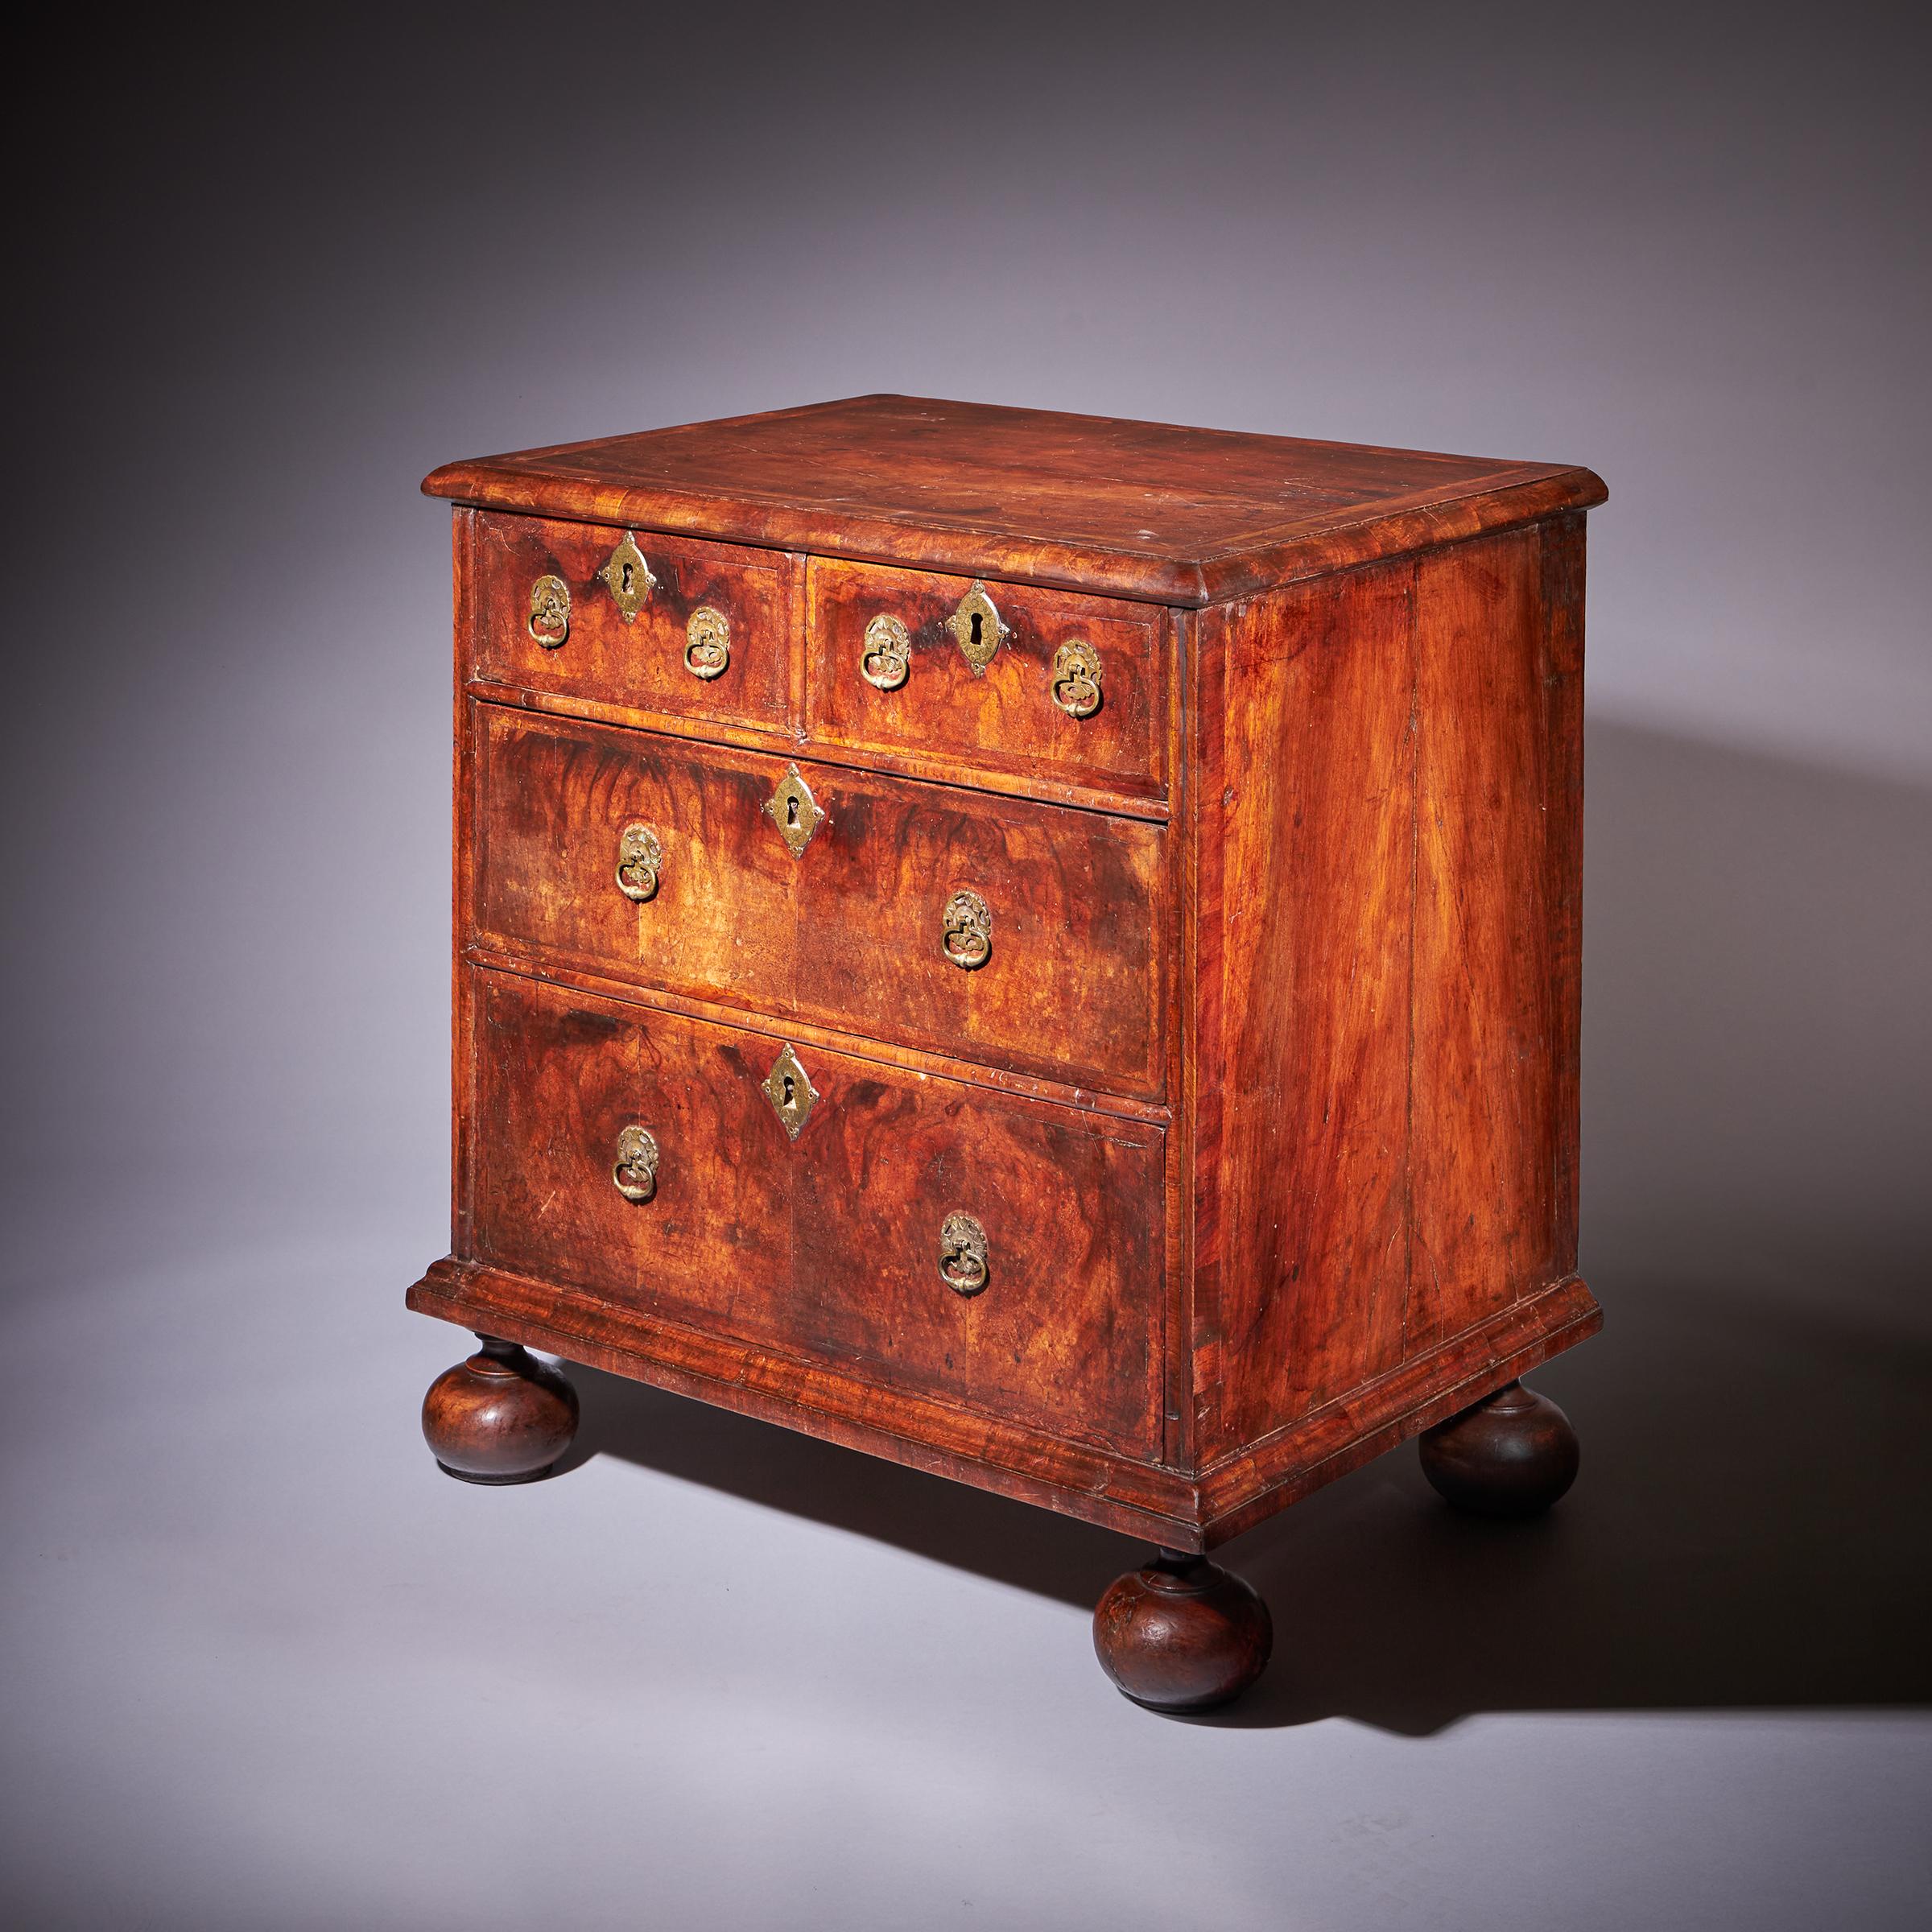 A 17th-century William and Mary figured walnut chest of drawers of diminutive proportions, circa 1690-1700. England.

The cross-grain moulded, feather and crossbanded quarter veneered walnut top sits above two short and two long oak-lined graduating